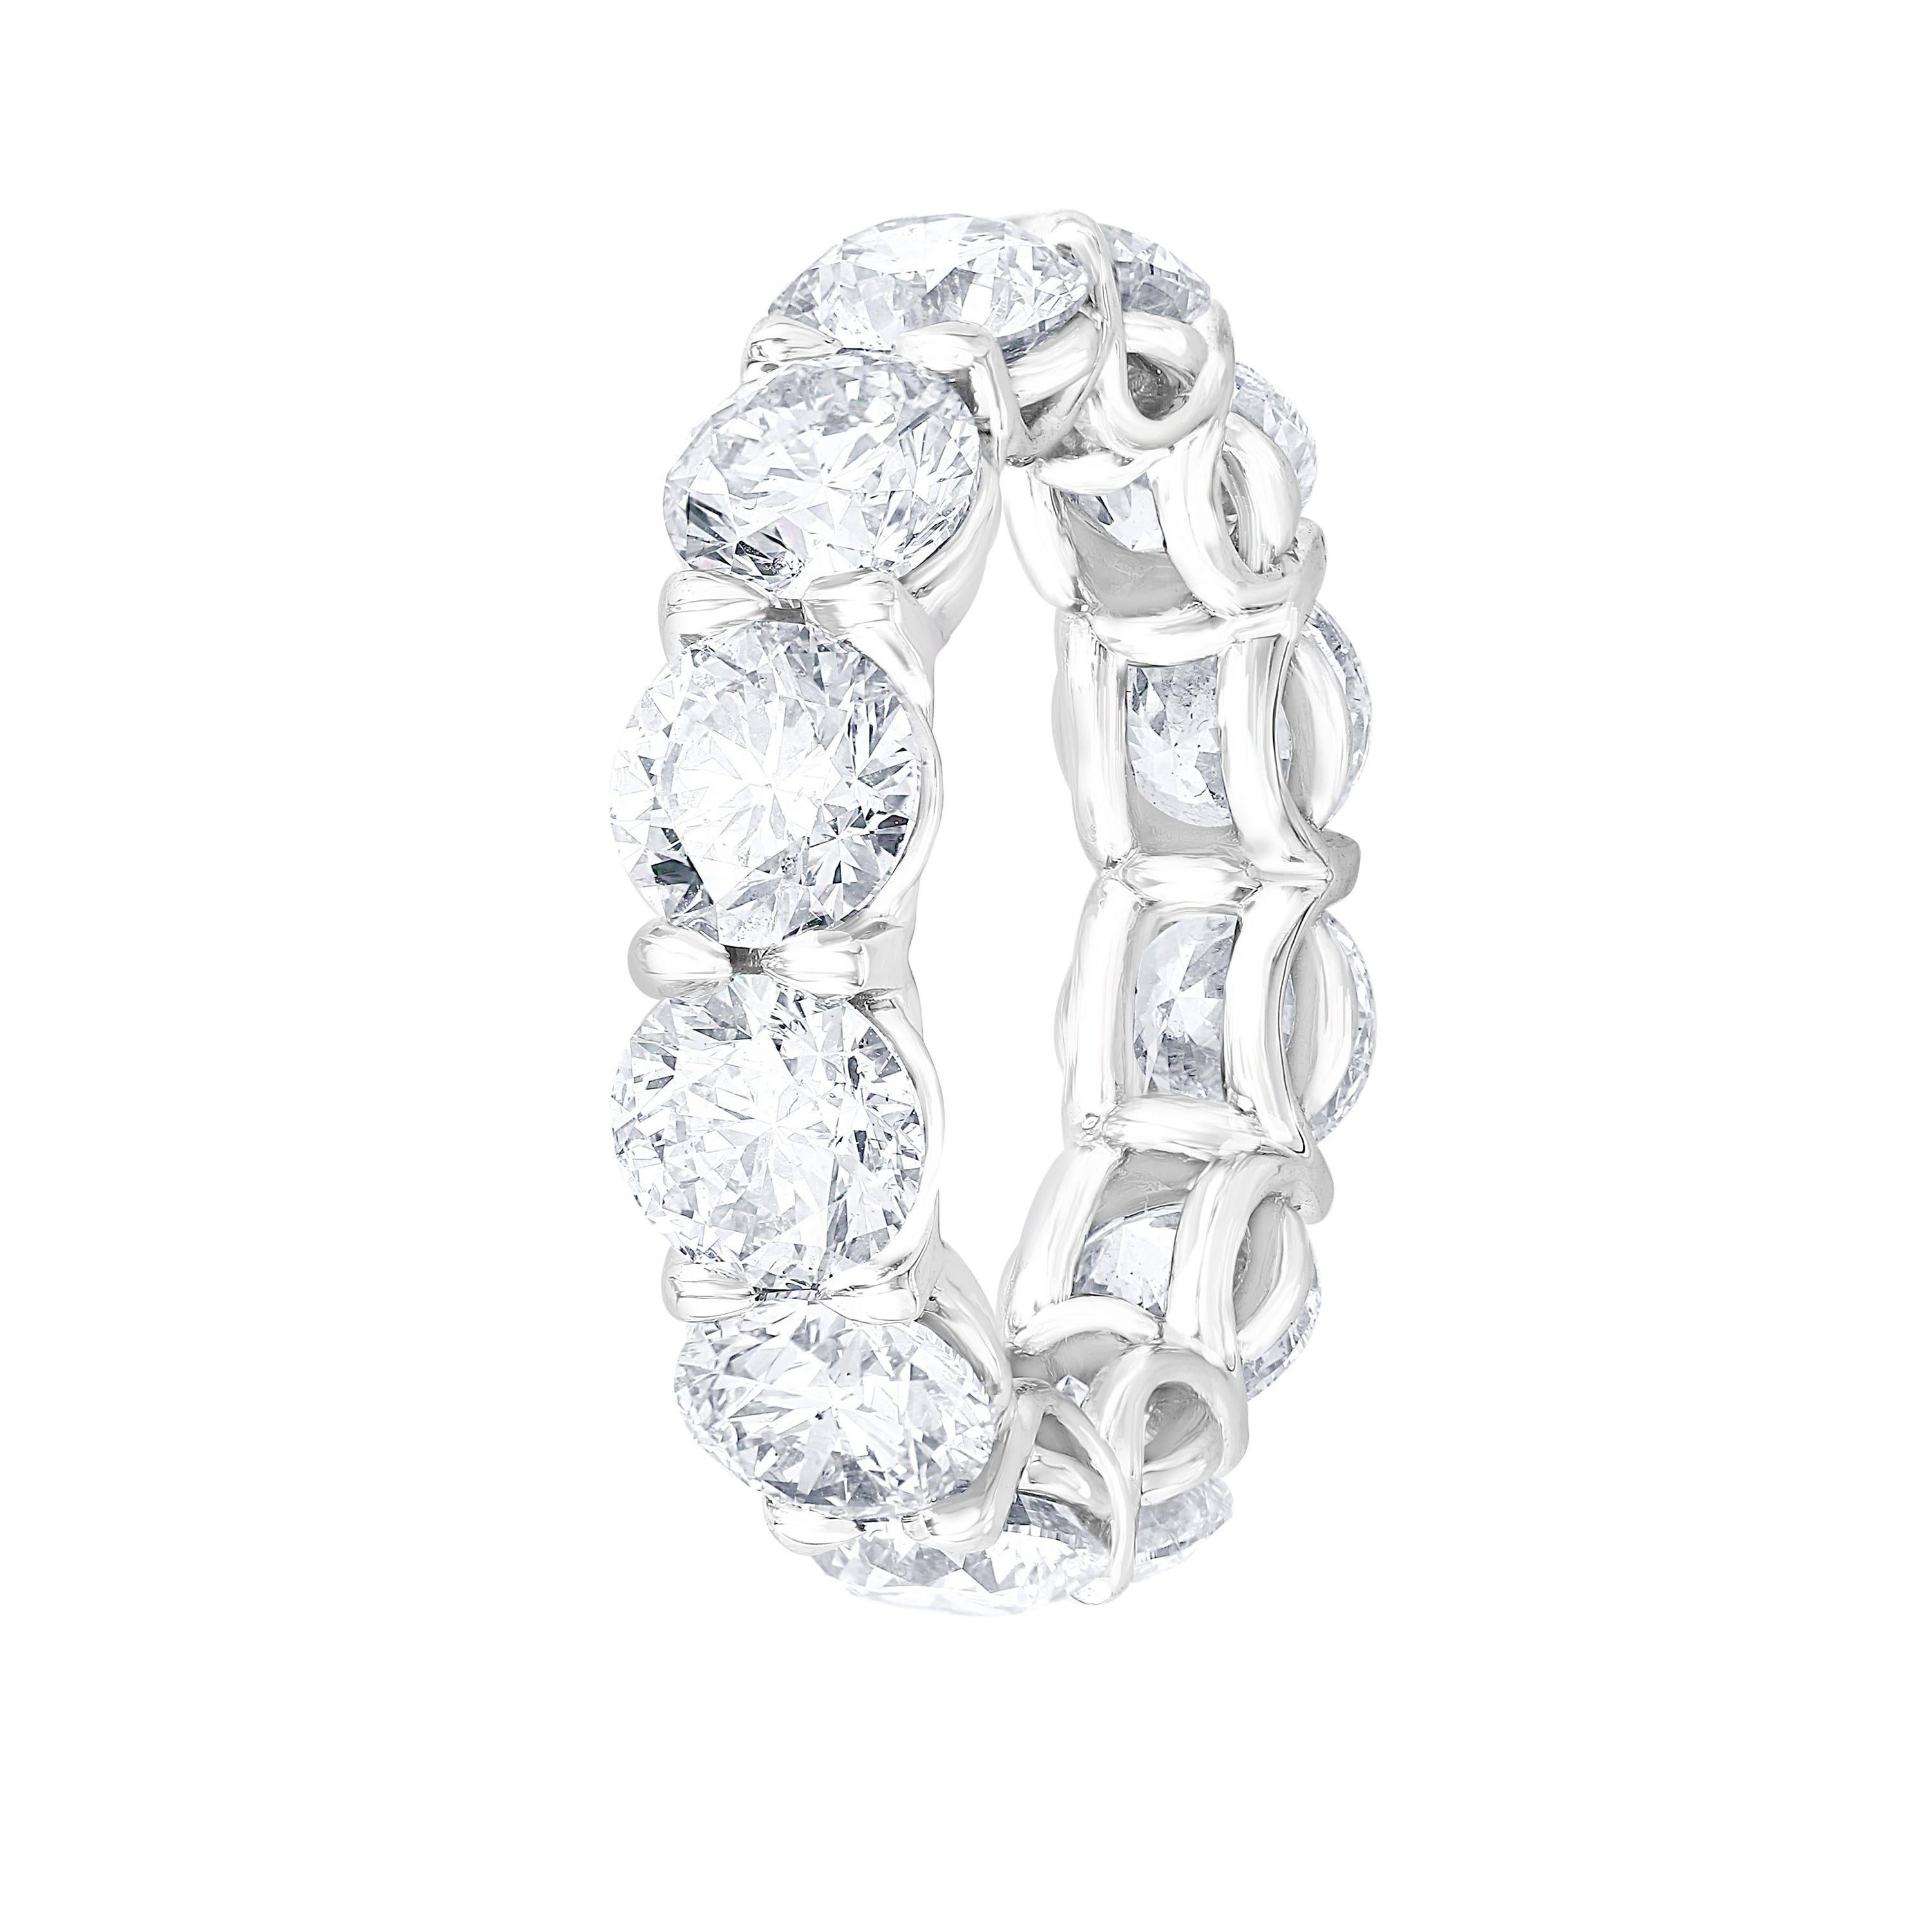 This beautiful Eternity Ring is set with 12 perfectly matched Round Brilliant Cut Diamonds, each weighing between 0.7ct to 0.72ct totaling 8.60 Carats. Made in New York City using Platinum 950. Fits US Size 6.25

Diamonds are of I-J color and SI